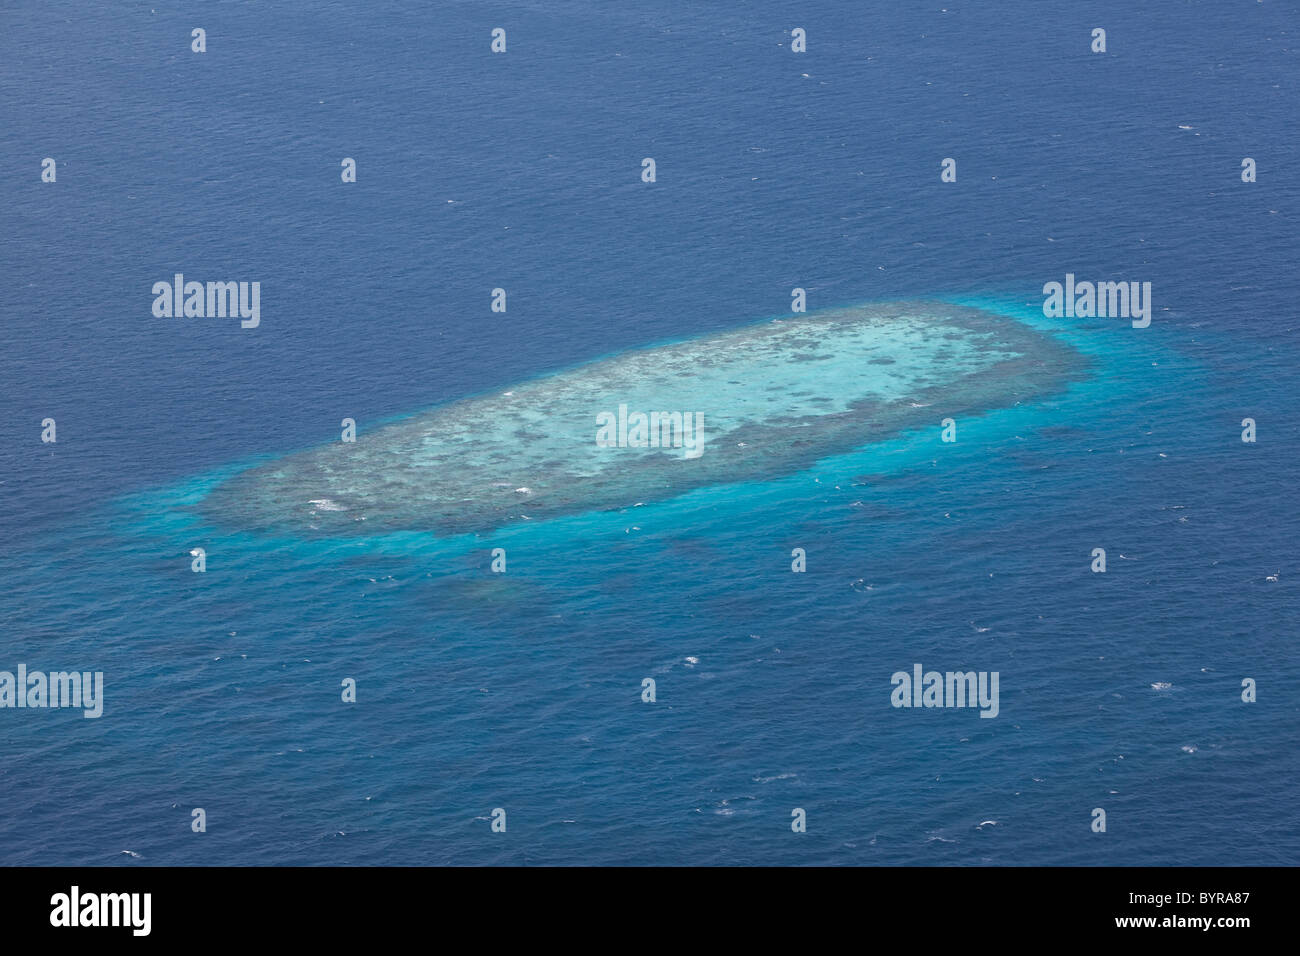 Aerial image of Maldivian Island from the air Stock Photo